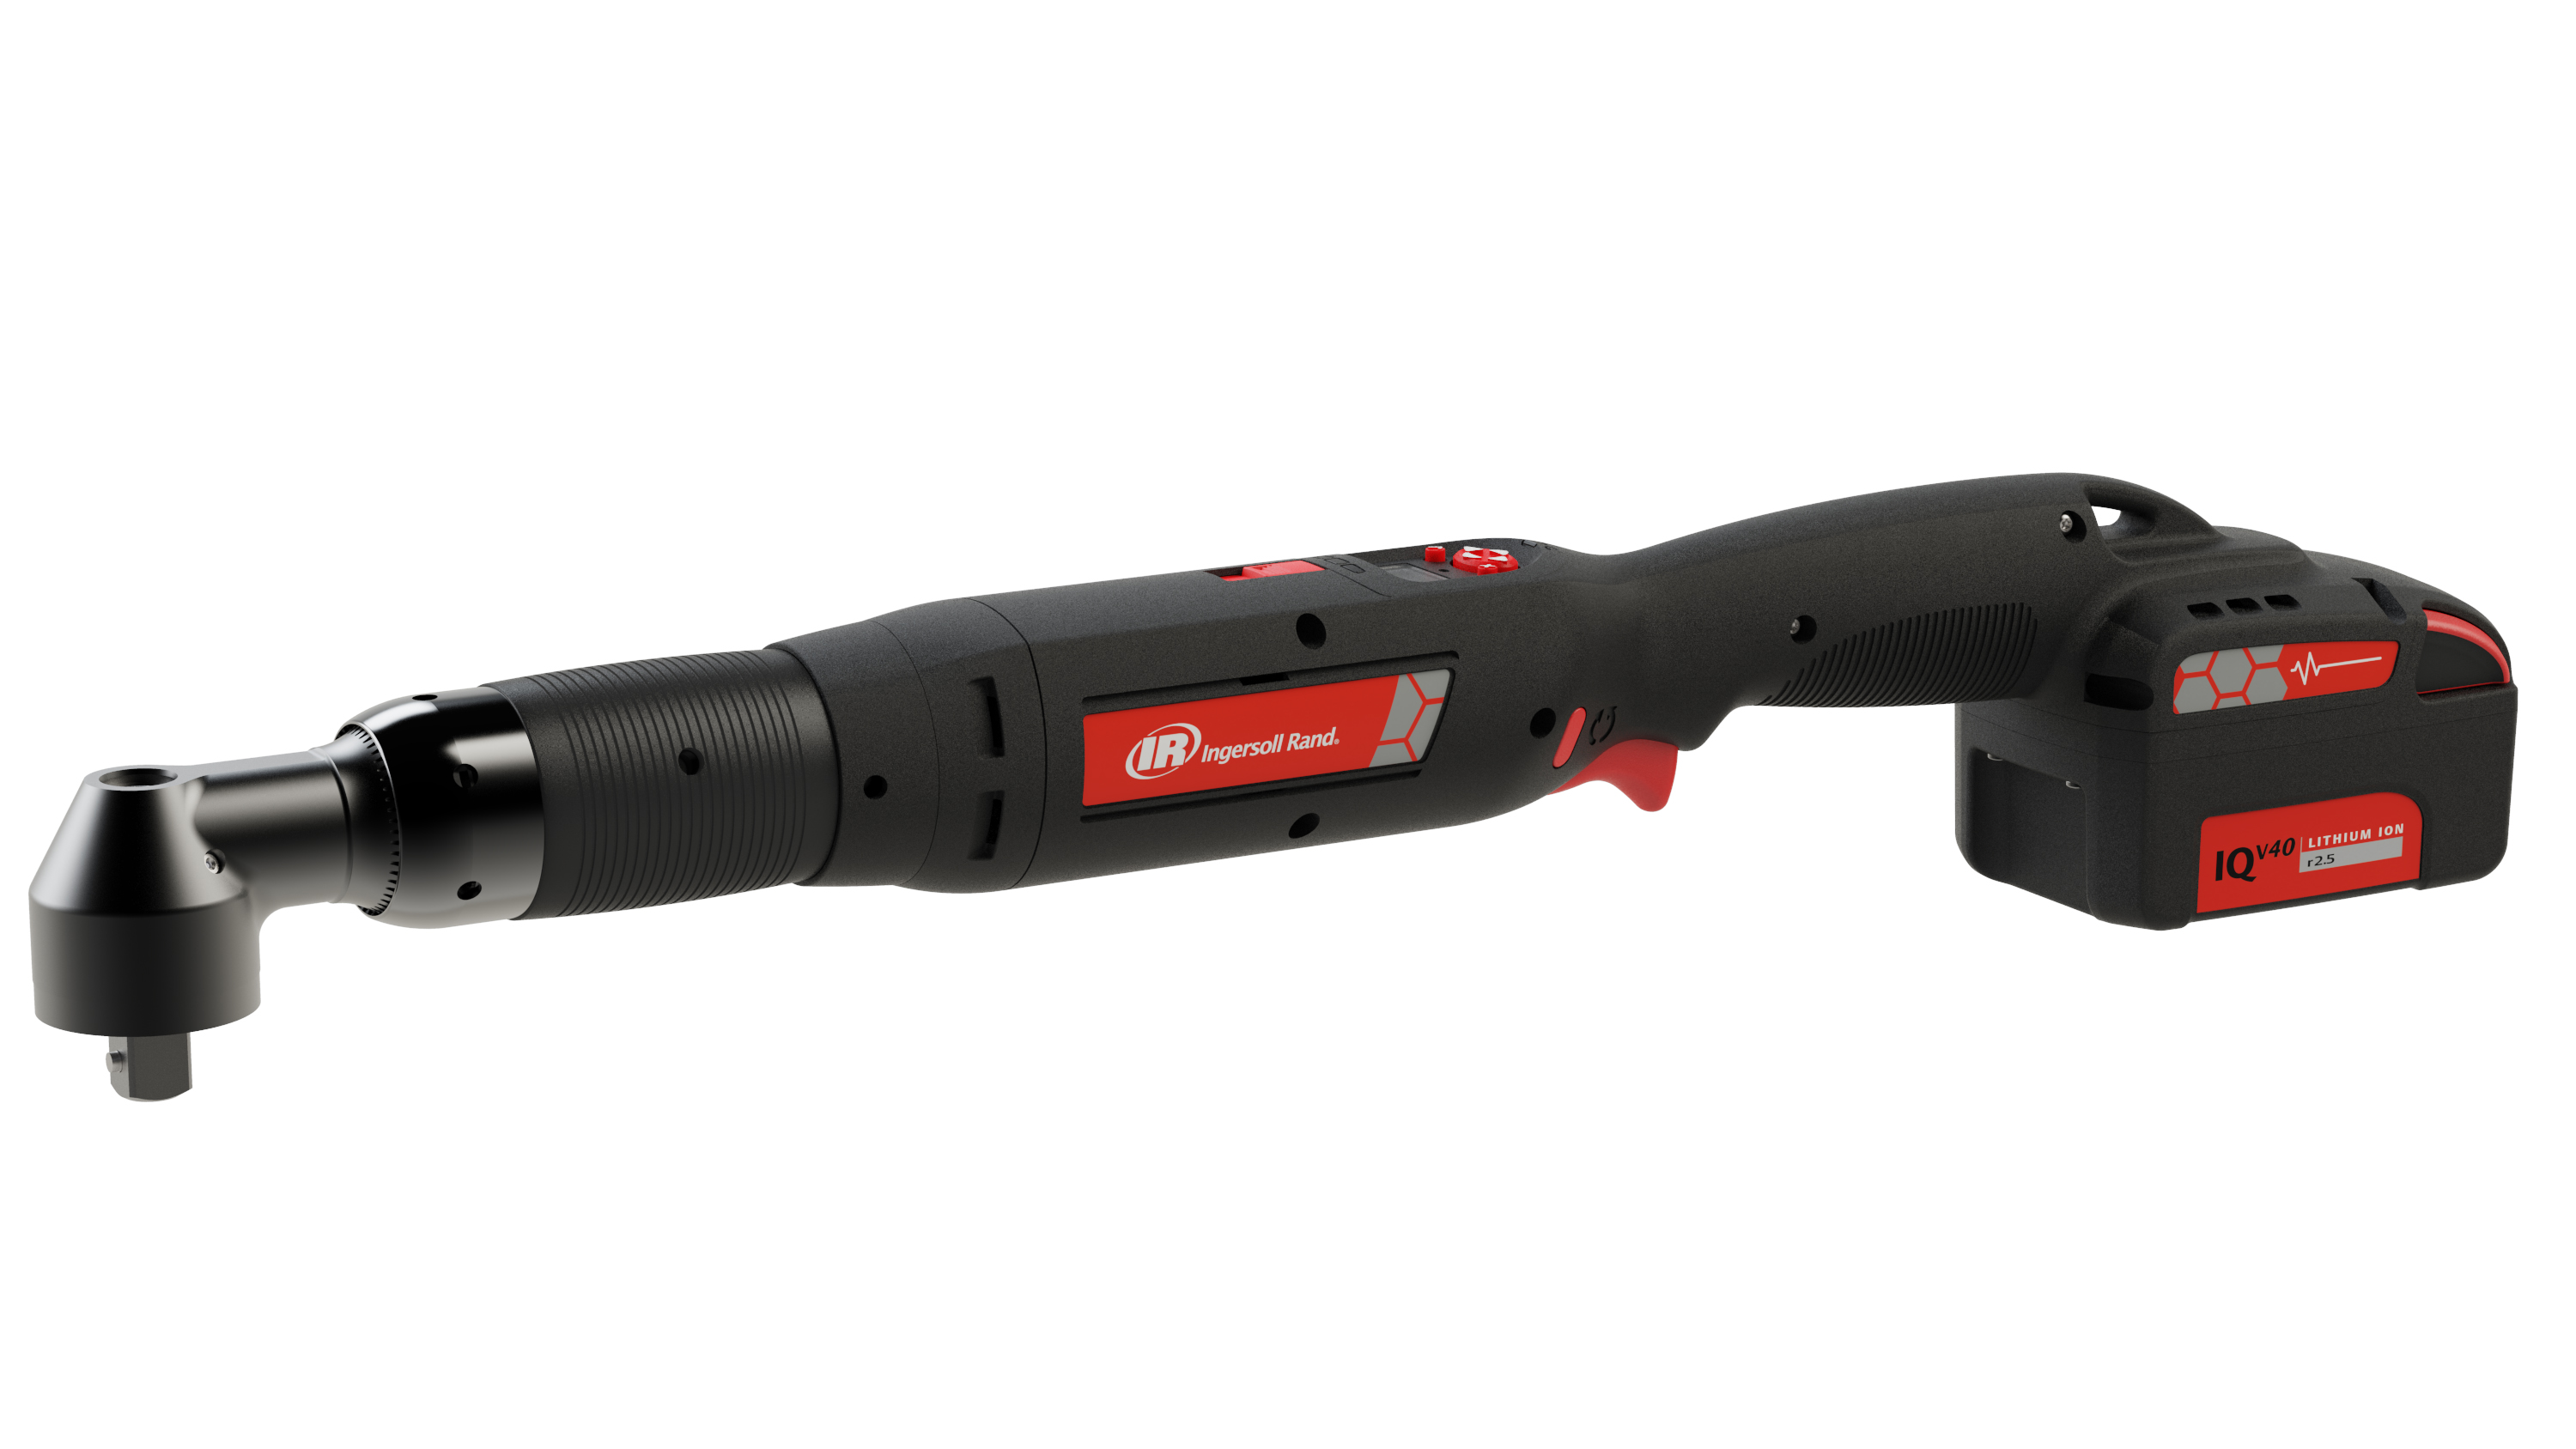 QXFN Cordless High Torque Angle Wrench